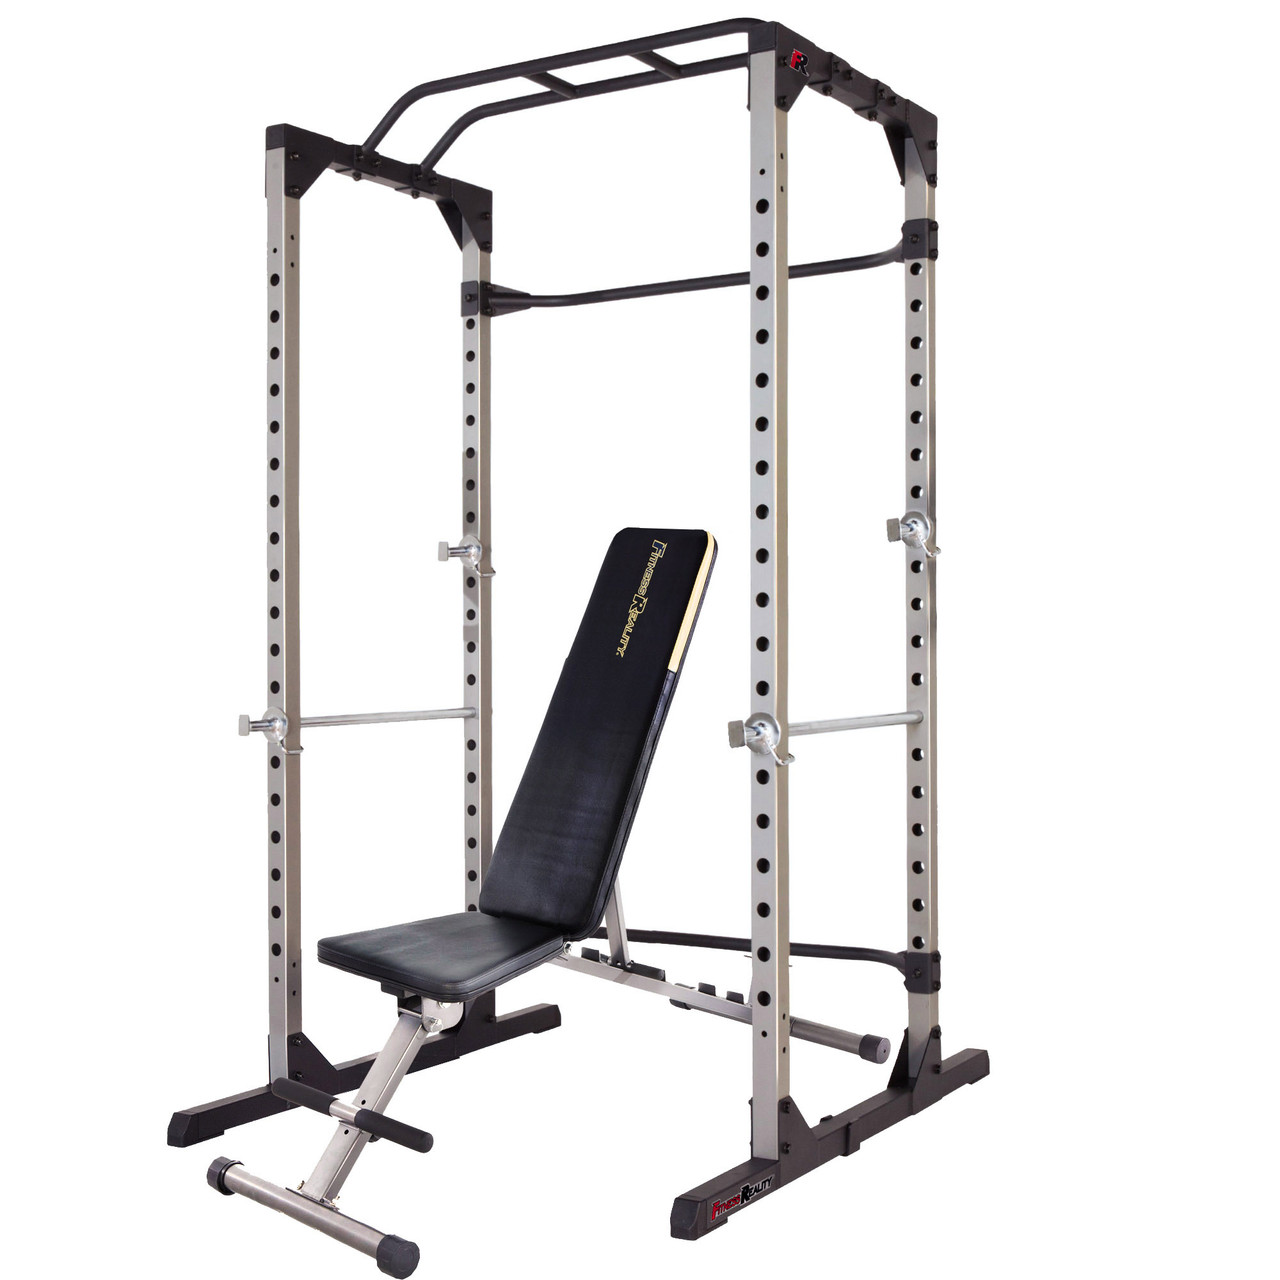 FITNESS REALITY 2000 Super Max XL High Capacity Weight Bench with  Detachable Leg Lock-Down